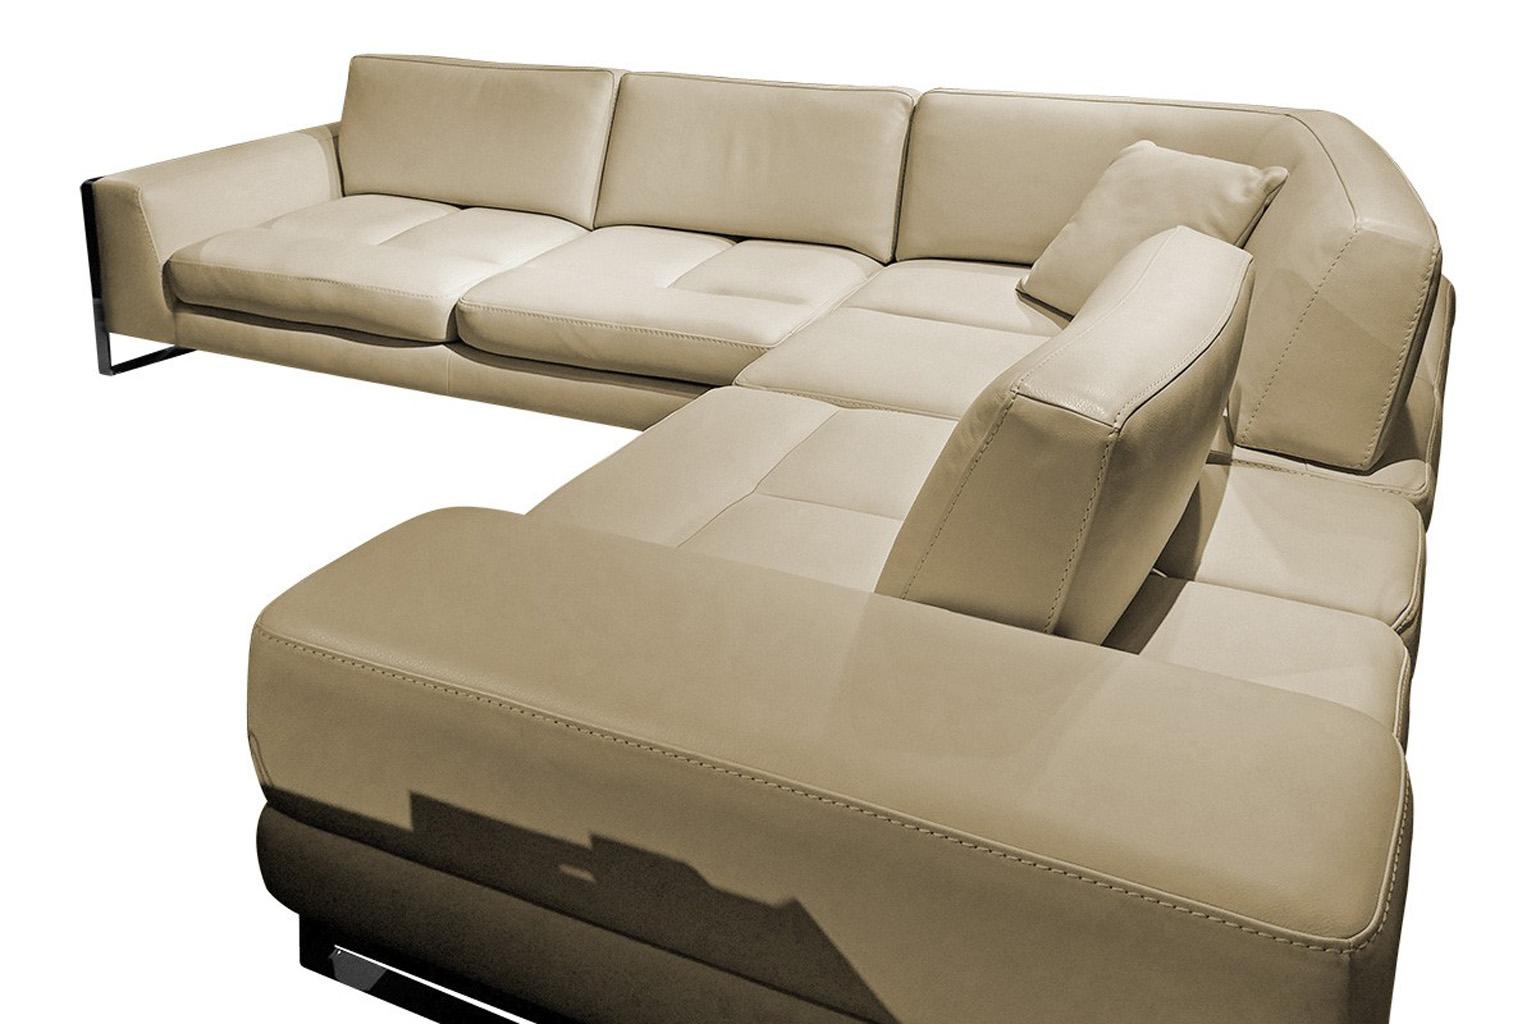 Leather sectional with 3 adjustable back cushions.
Upholstered in high grade leather with tone-on-tone stitching.
Polished chrome details.

This item is only available to purchase in the United States. Please inquire for availability if you are